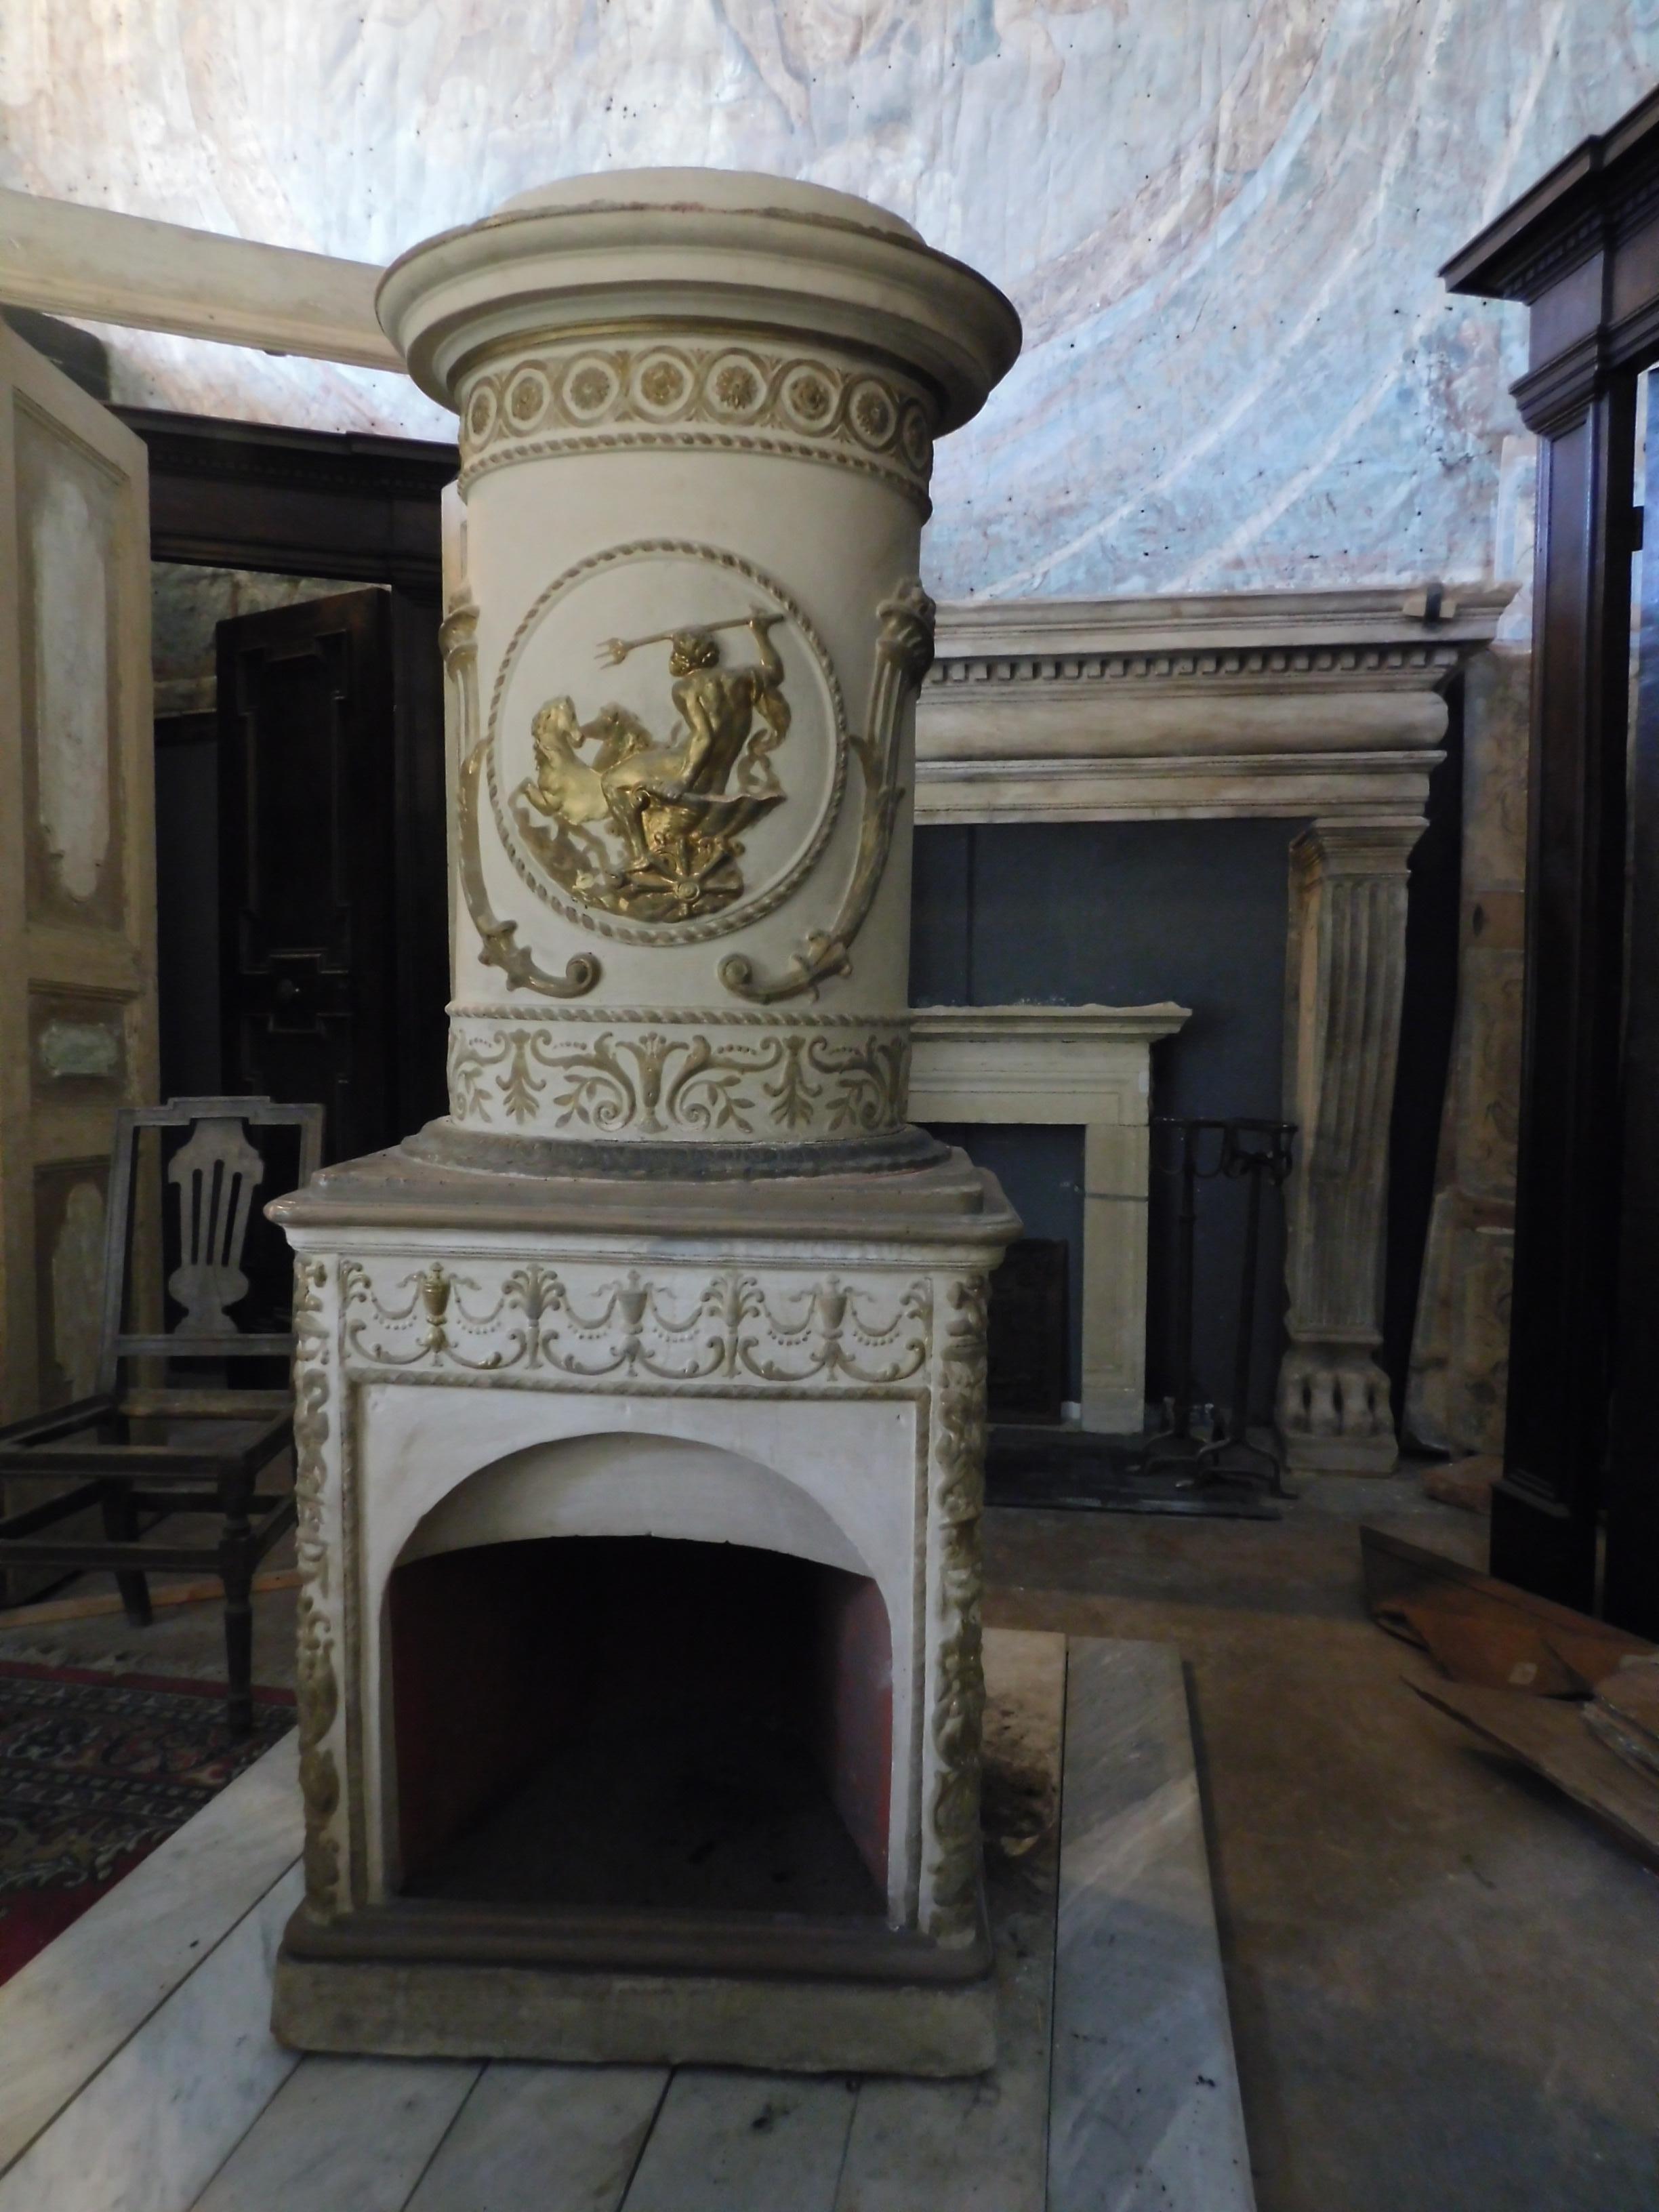 18th Century Antique Stove Ceramic White and Gold, Carved Flue, Late 1700 Italy